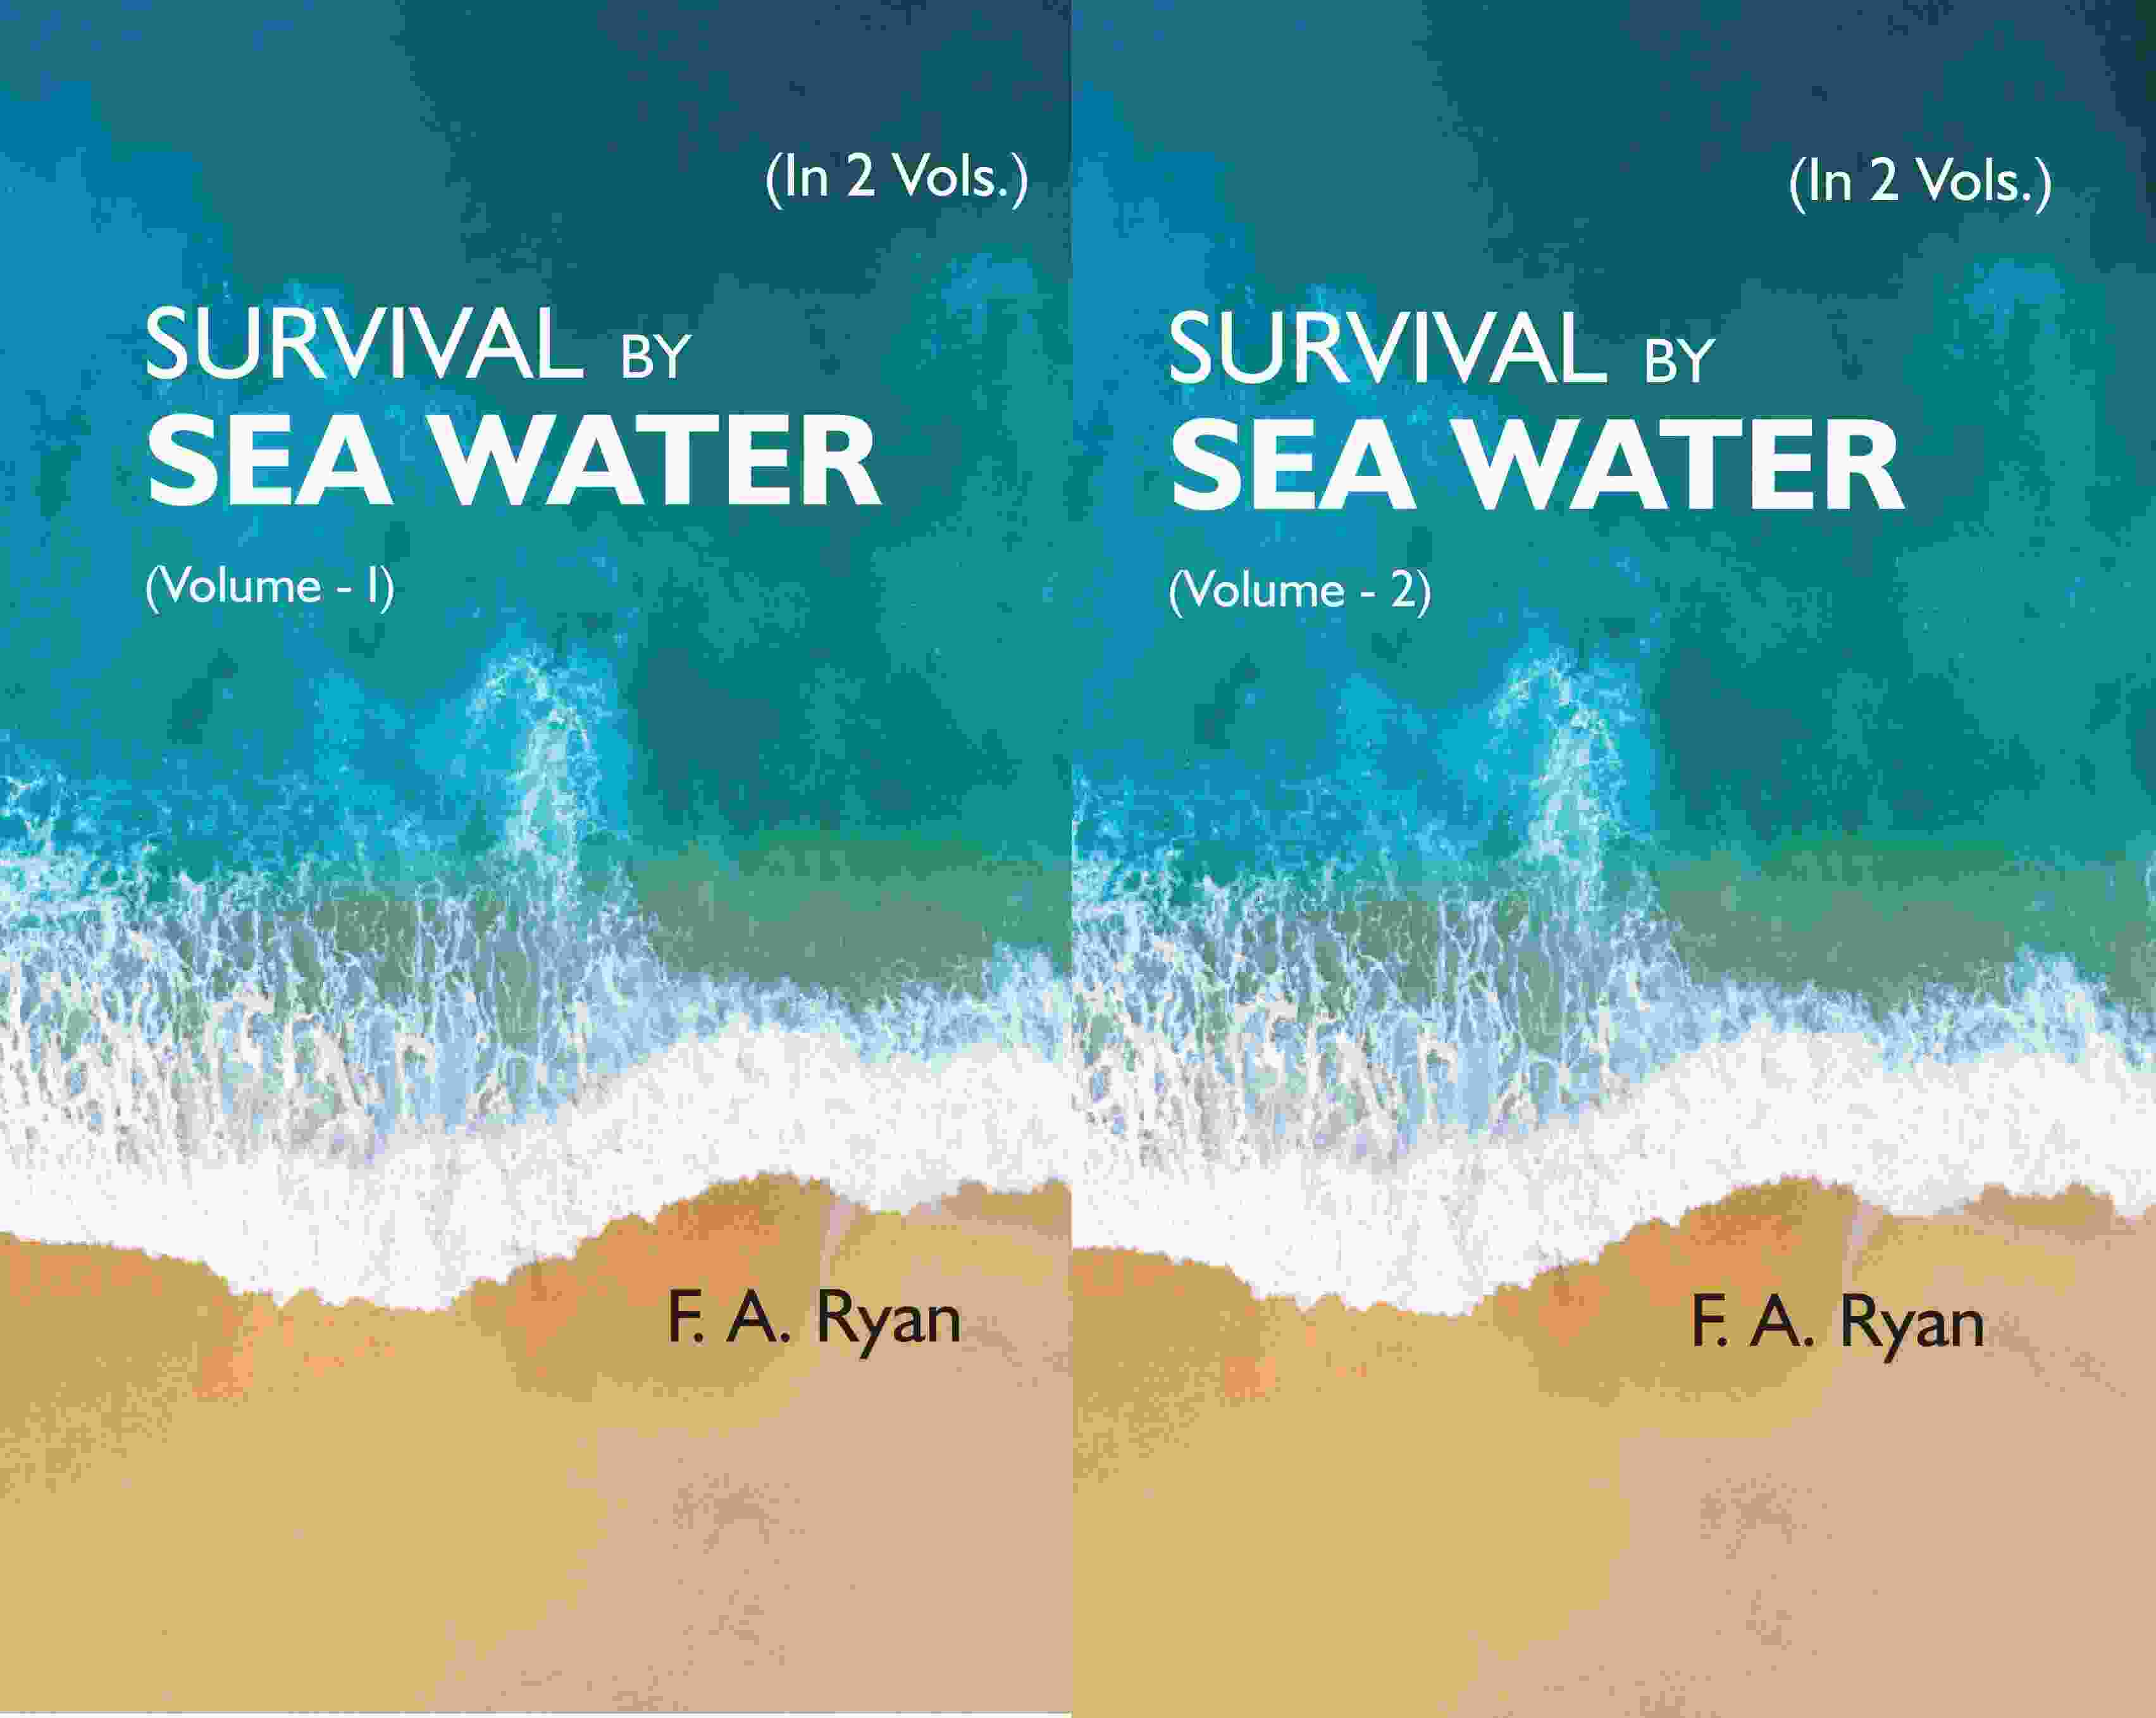 SURVIVAL BY SEA WATER